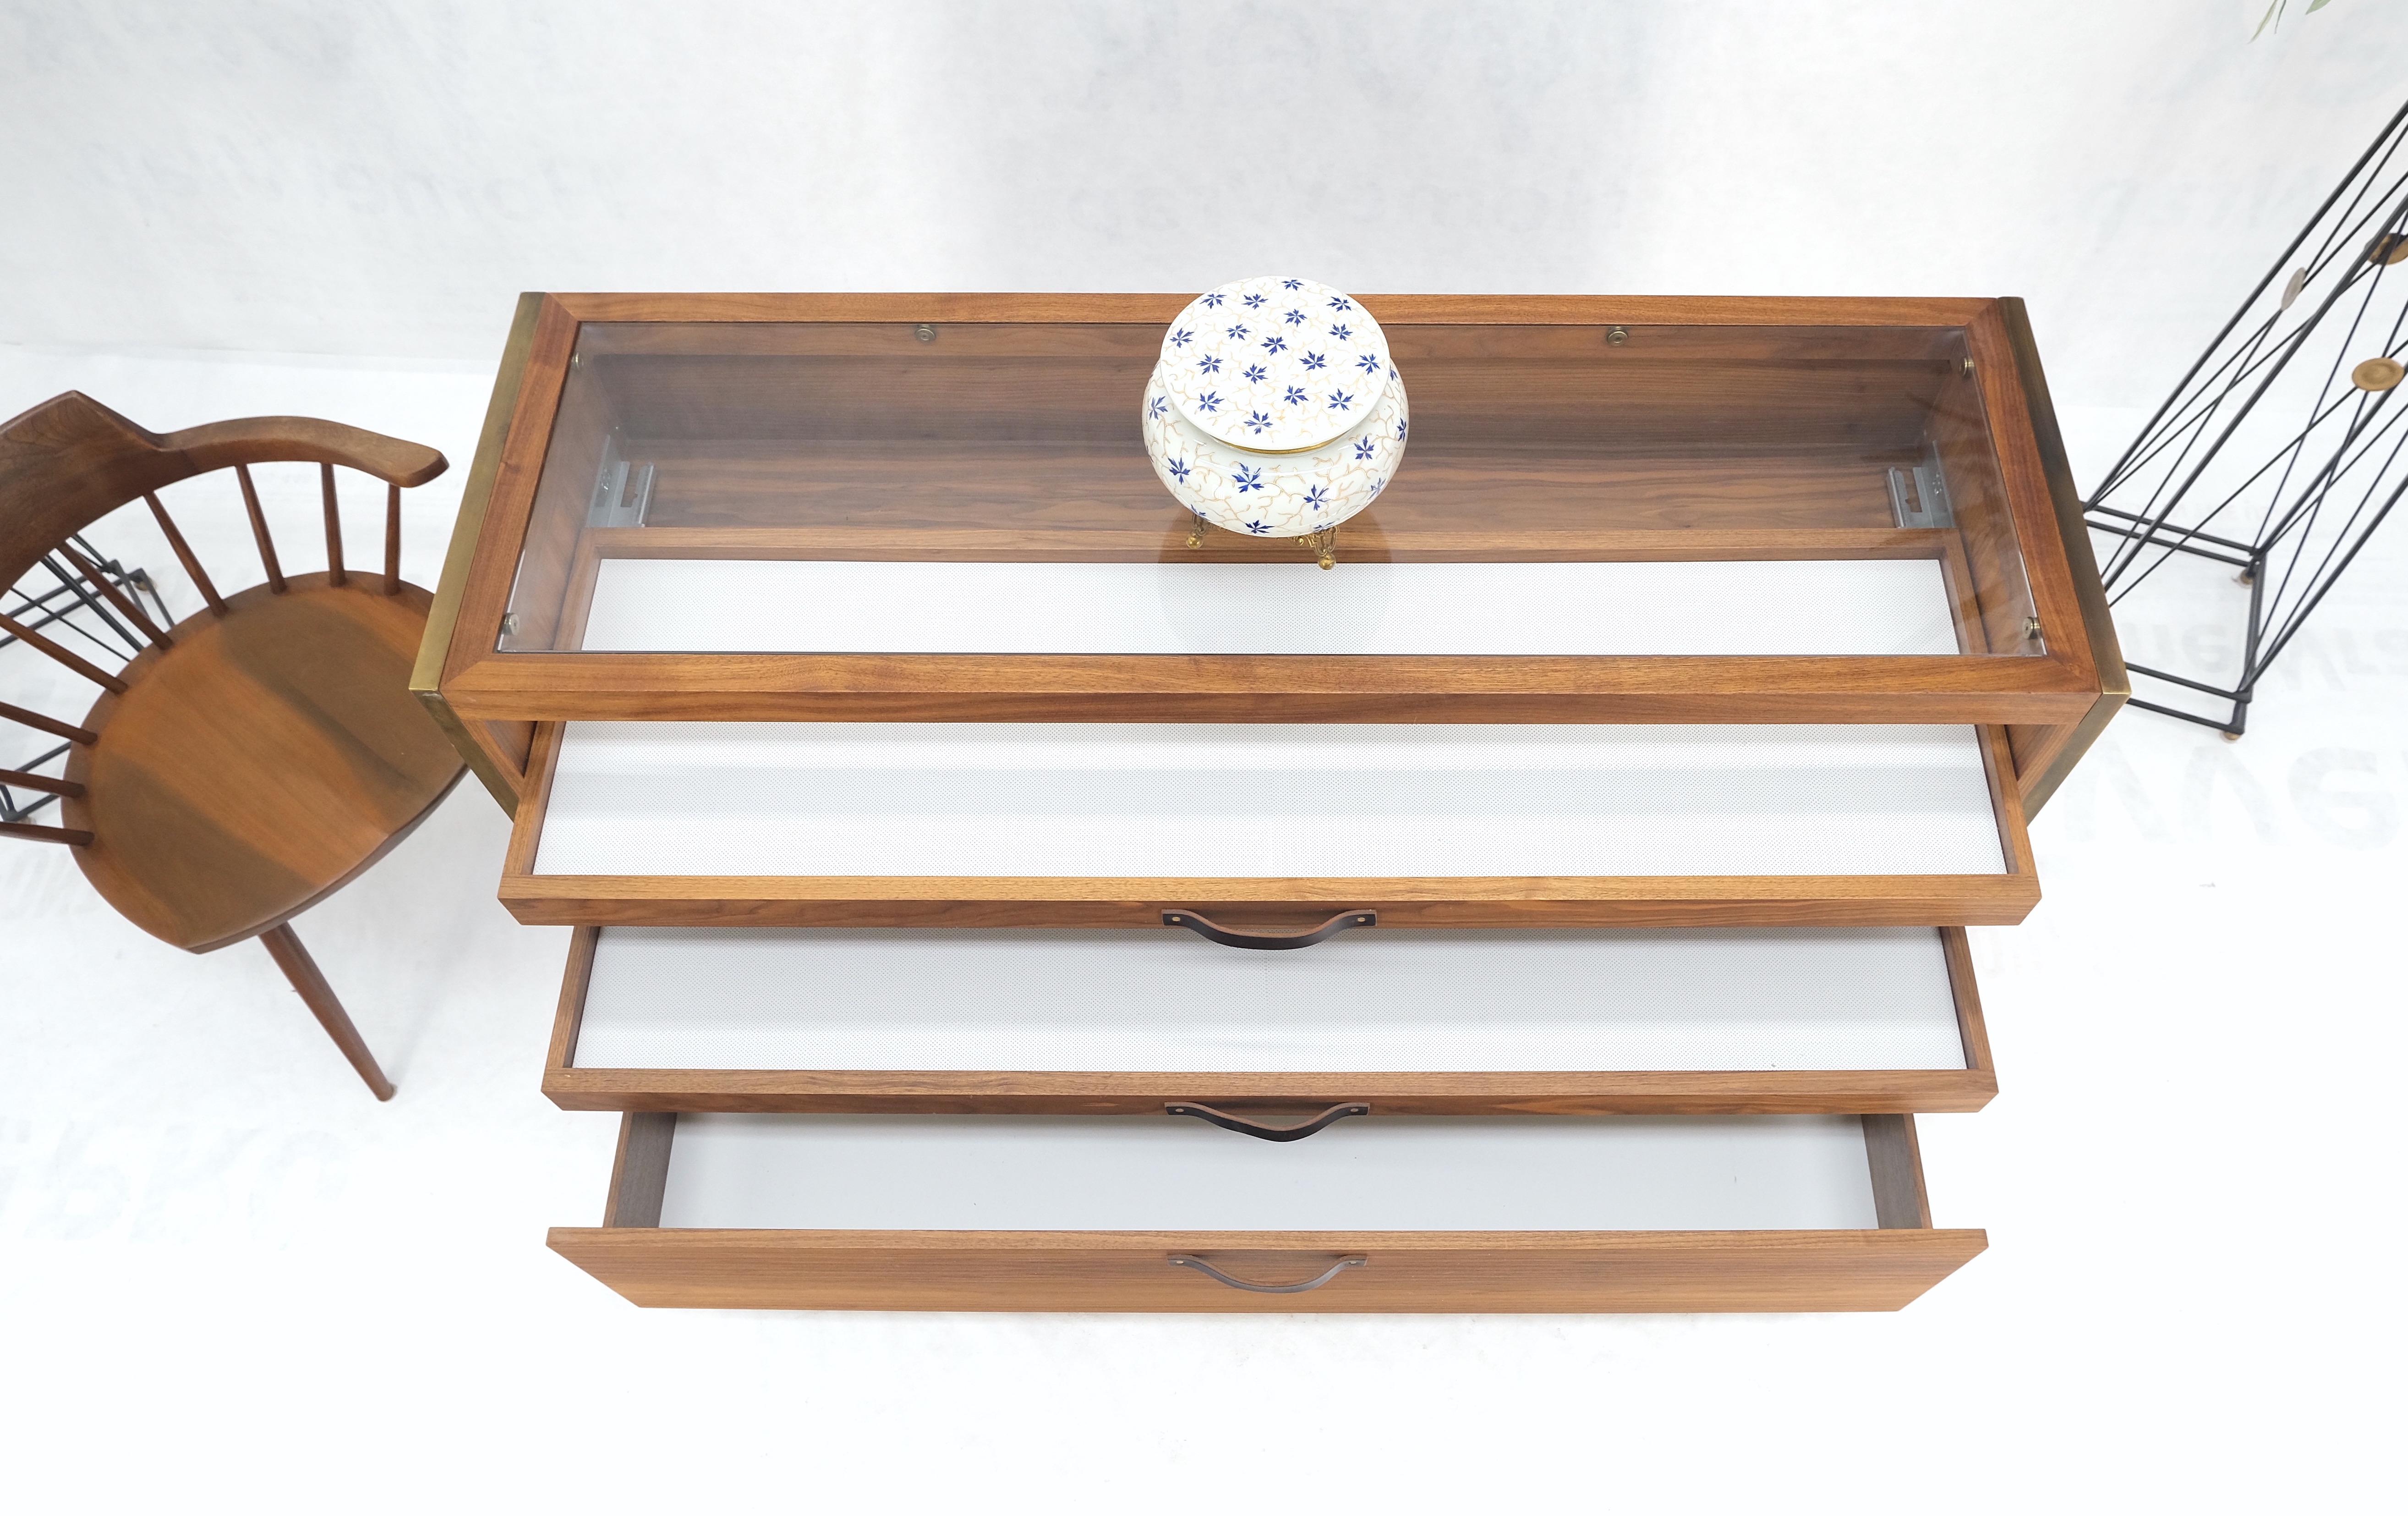 American Unusual Mid-Century Modern Solid Walnut Console Sofa Table with Drawers Mint! For Sale